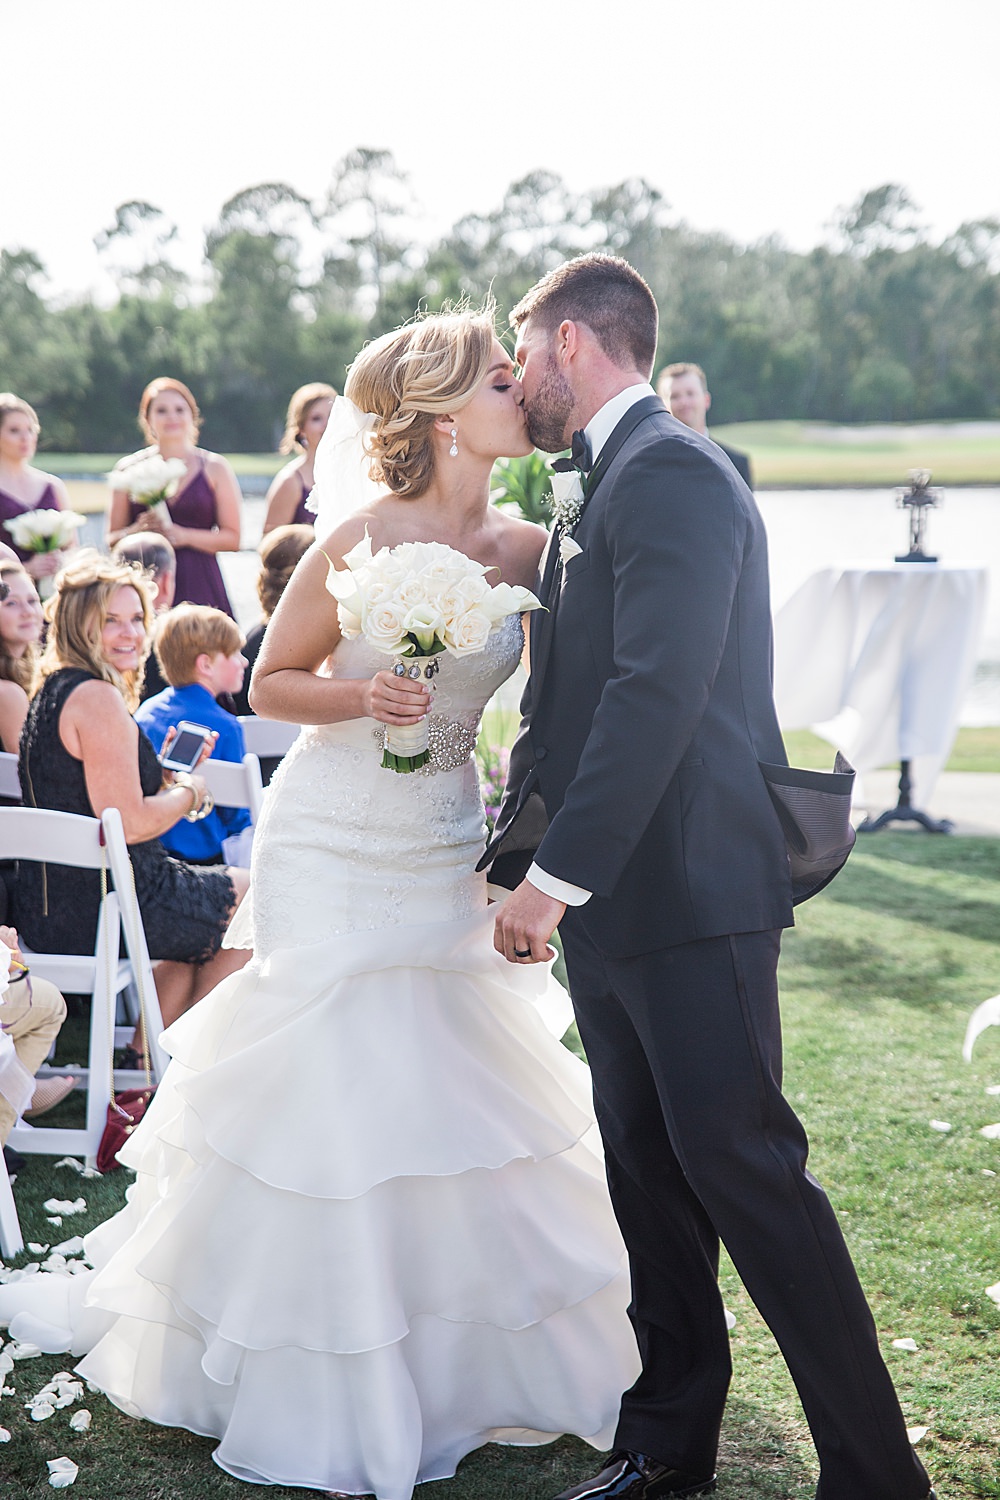 Bride and groom share first kiss at their wedding ceremony